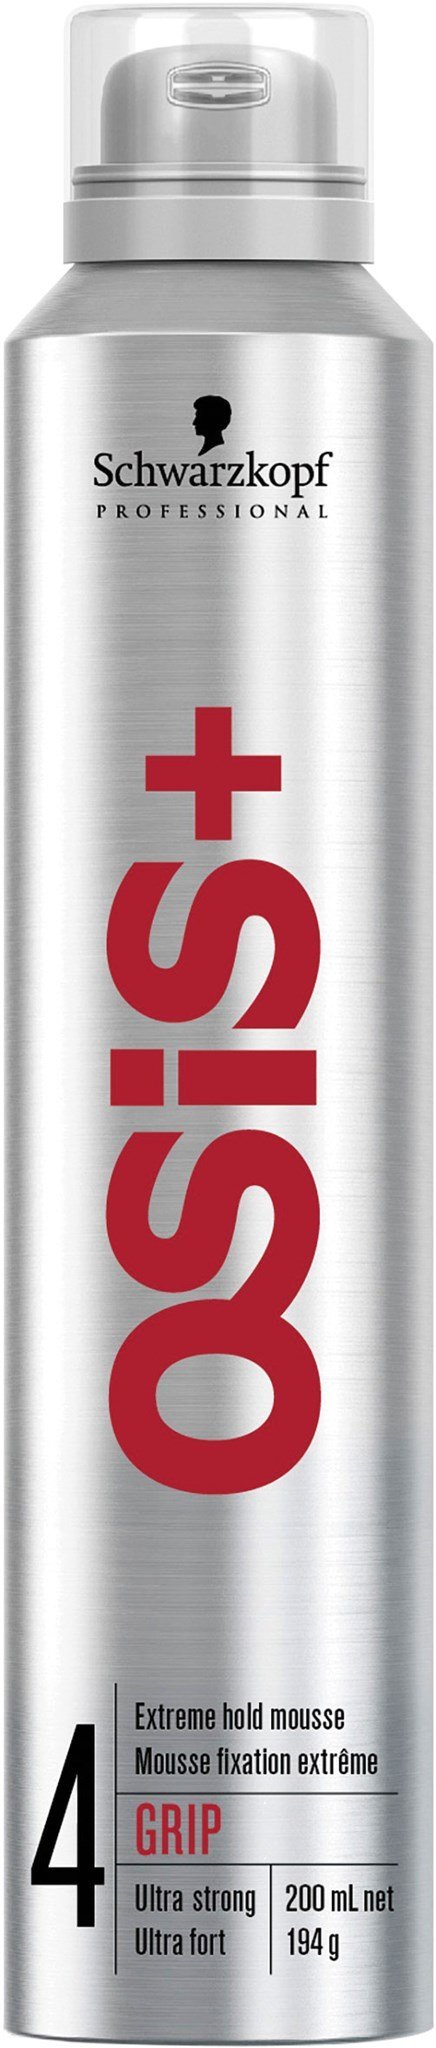 OSIS+ MS Grip Extreme Hold Mousse 200ml